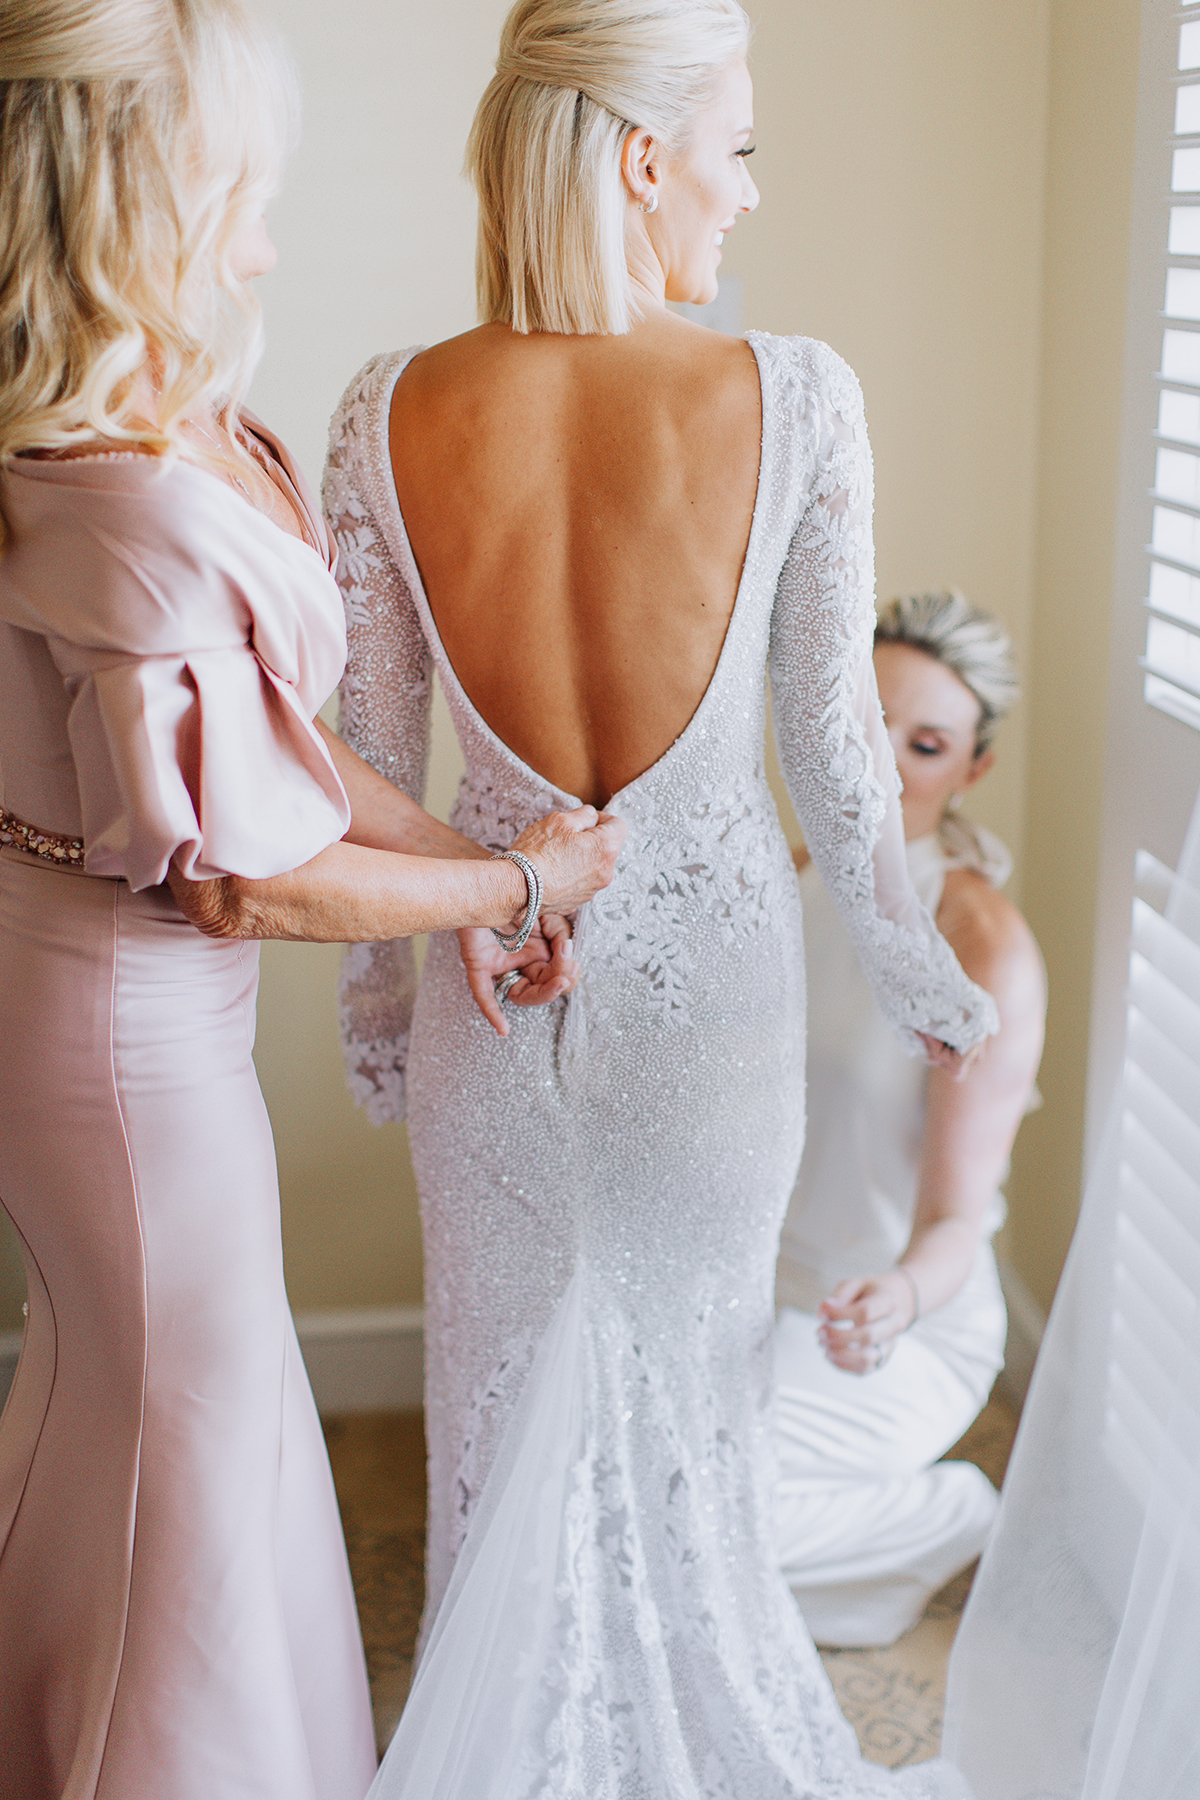 the best place to go wedding dress shopping in Dallas